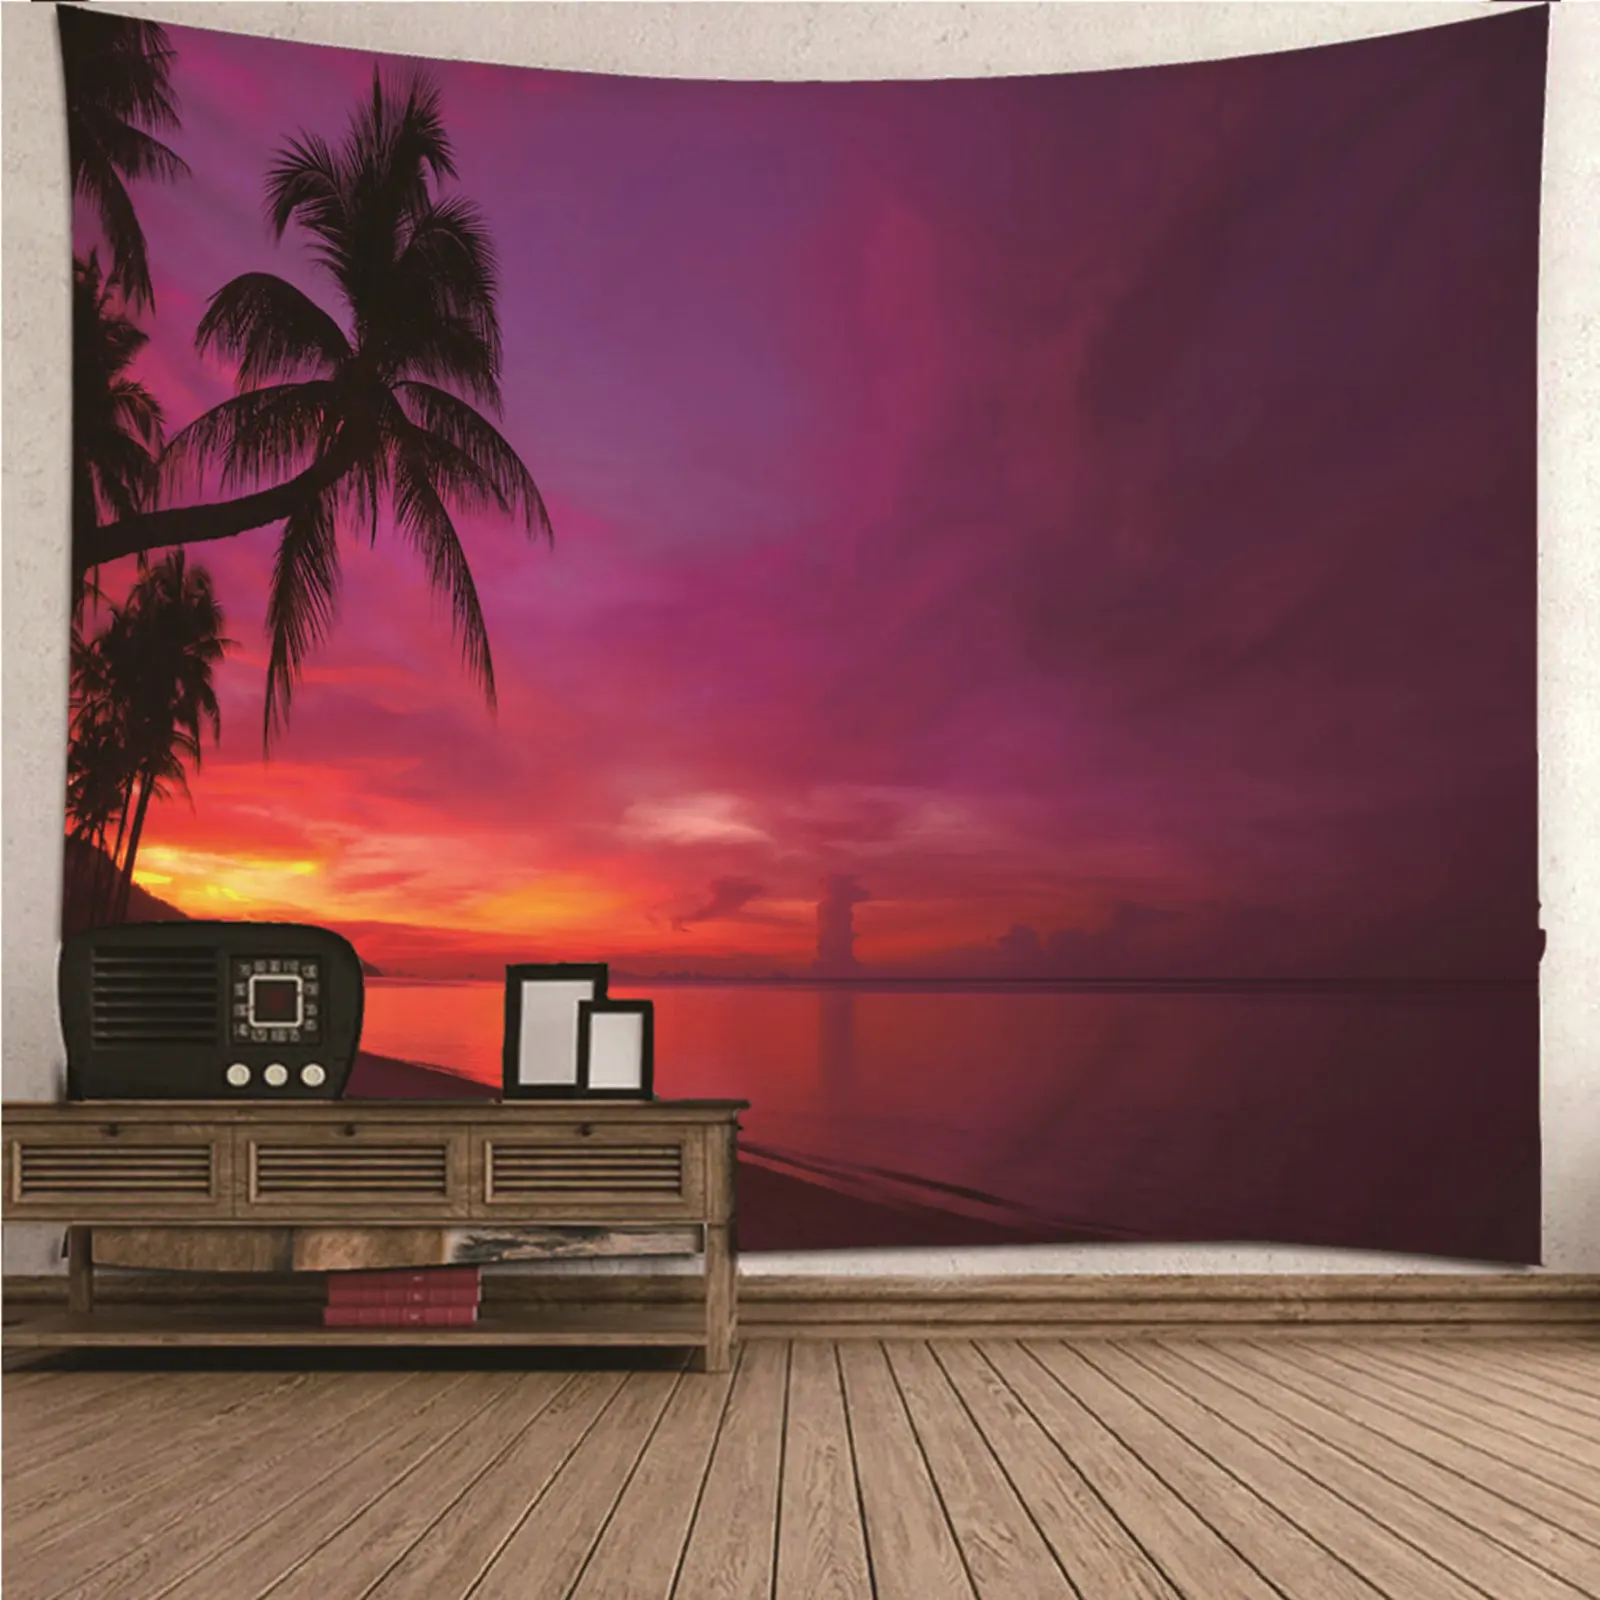 

Wall Tapestry Art Wall Tapestry Painting natural scenery Sunset Coconut Palms Ocean Wall Hanging Blanket Dorm Art Decor Covering